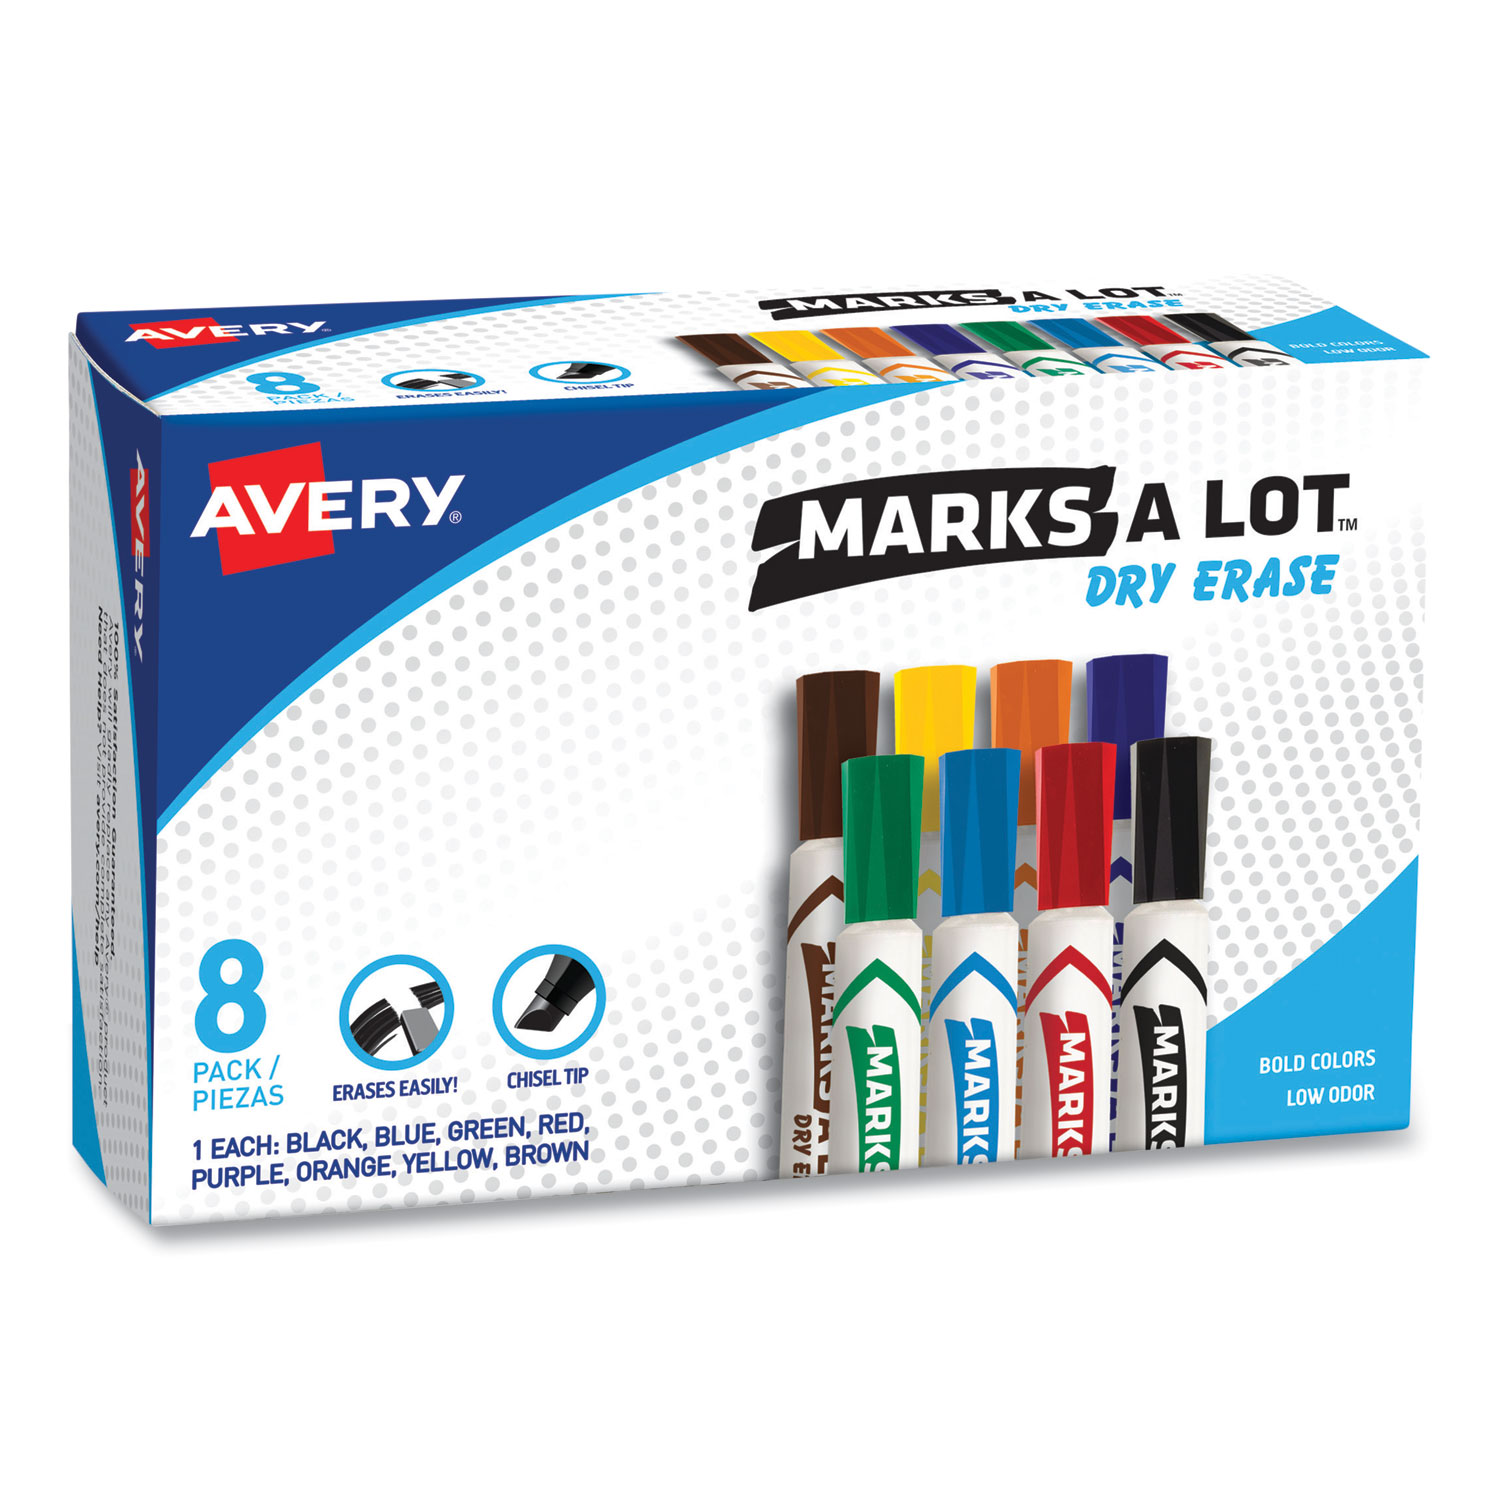 Avery 24800 Marks-A-Lot Permanent Markers, Large Size, Chisel Tip